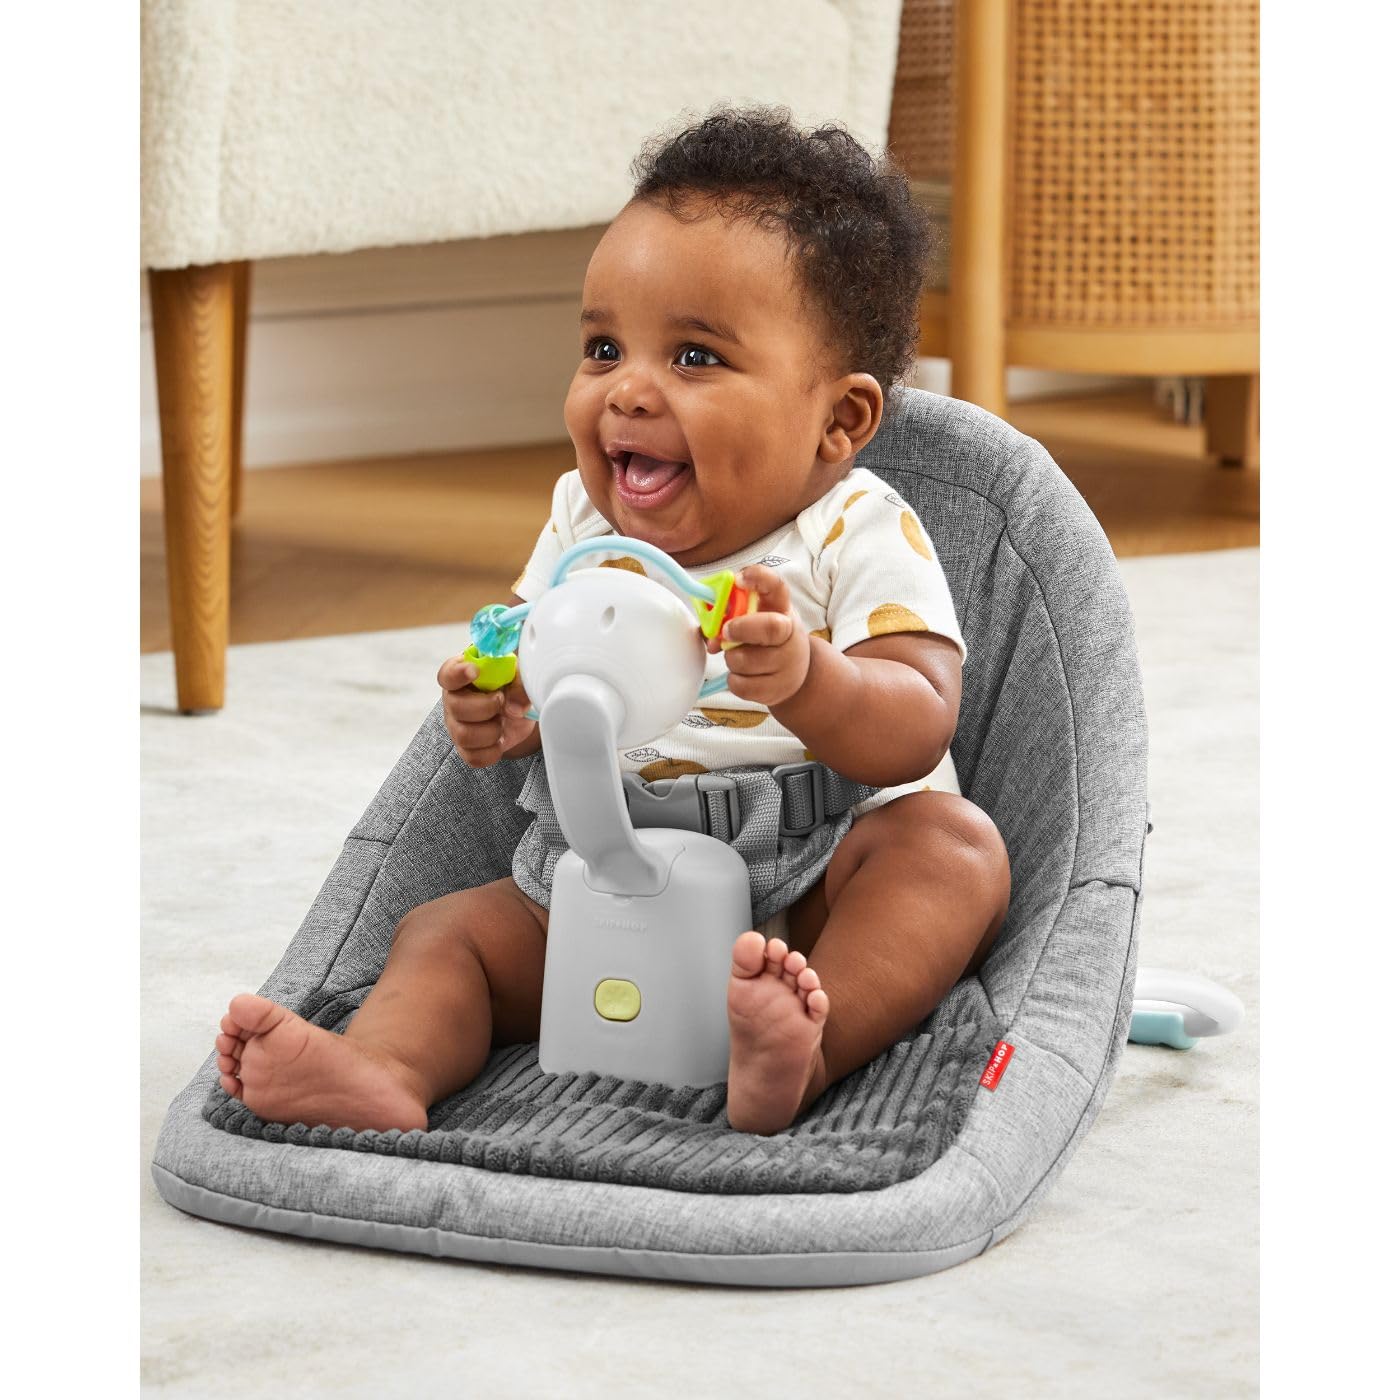 Skip Hop Baby Ergonomic Activity Floor Seat for Upright Sitting, Silver Lining Cloud, Gray